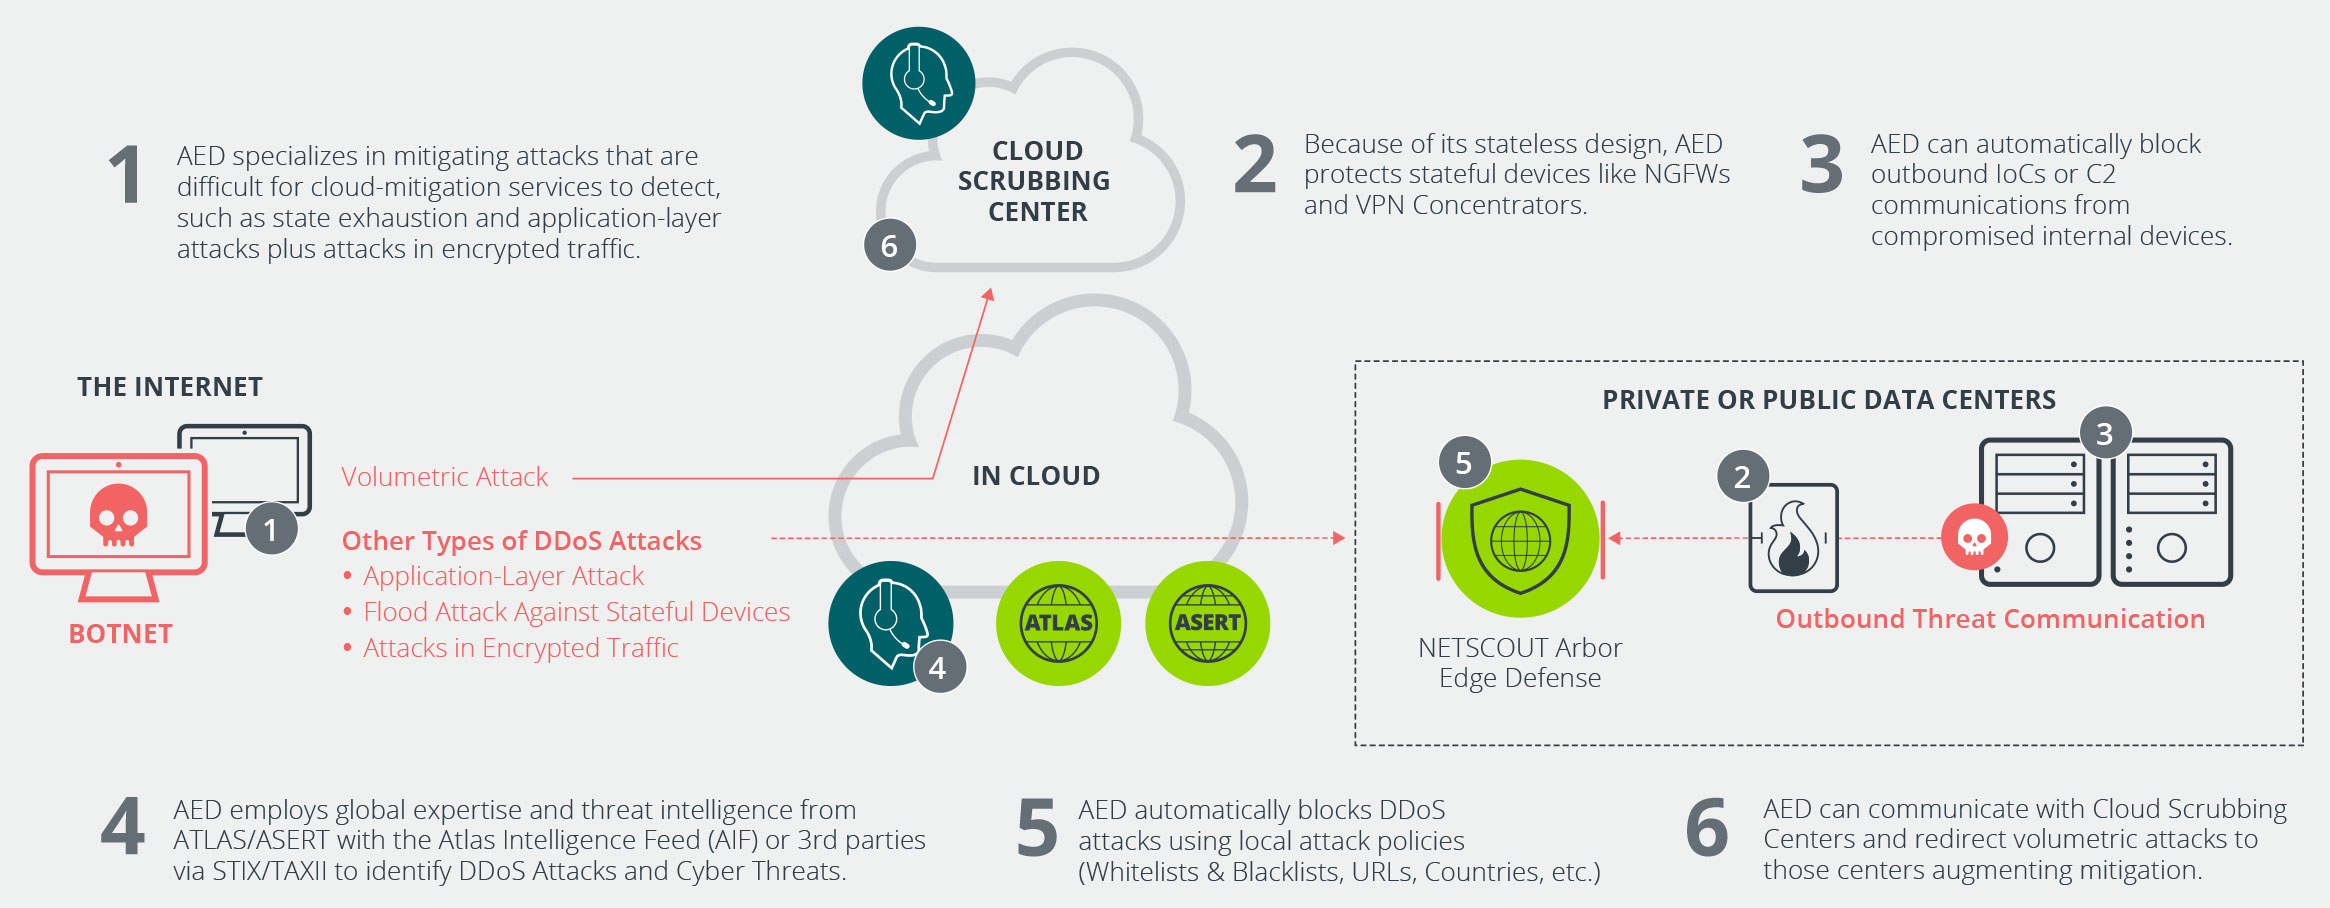 NETSCOUT Arbor DDoS Attack Protection Solution